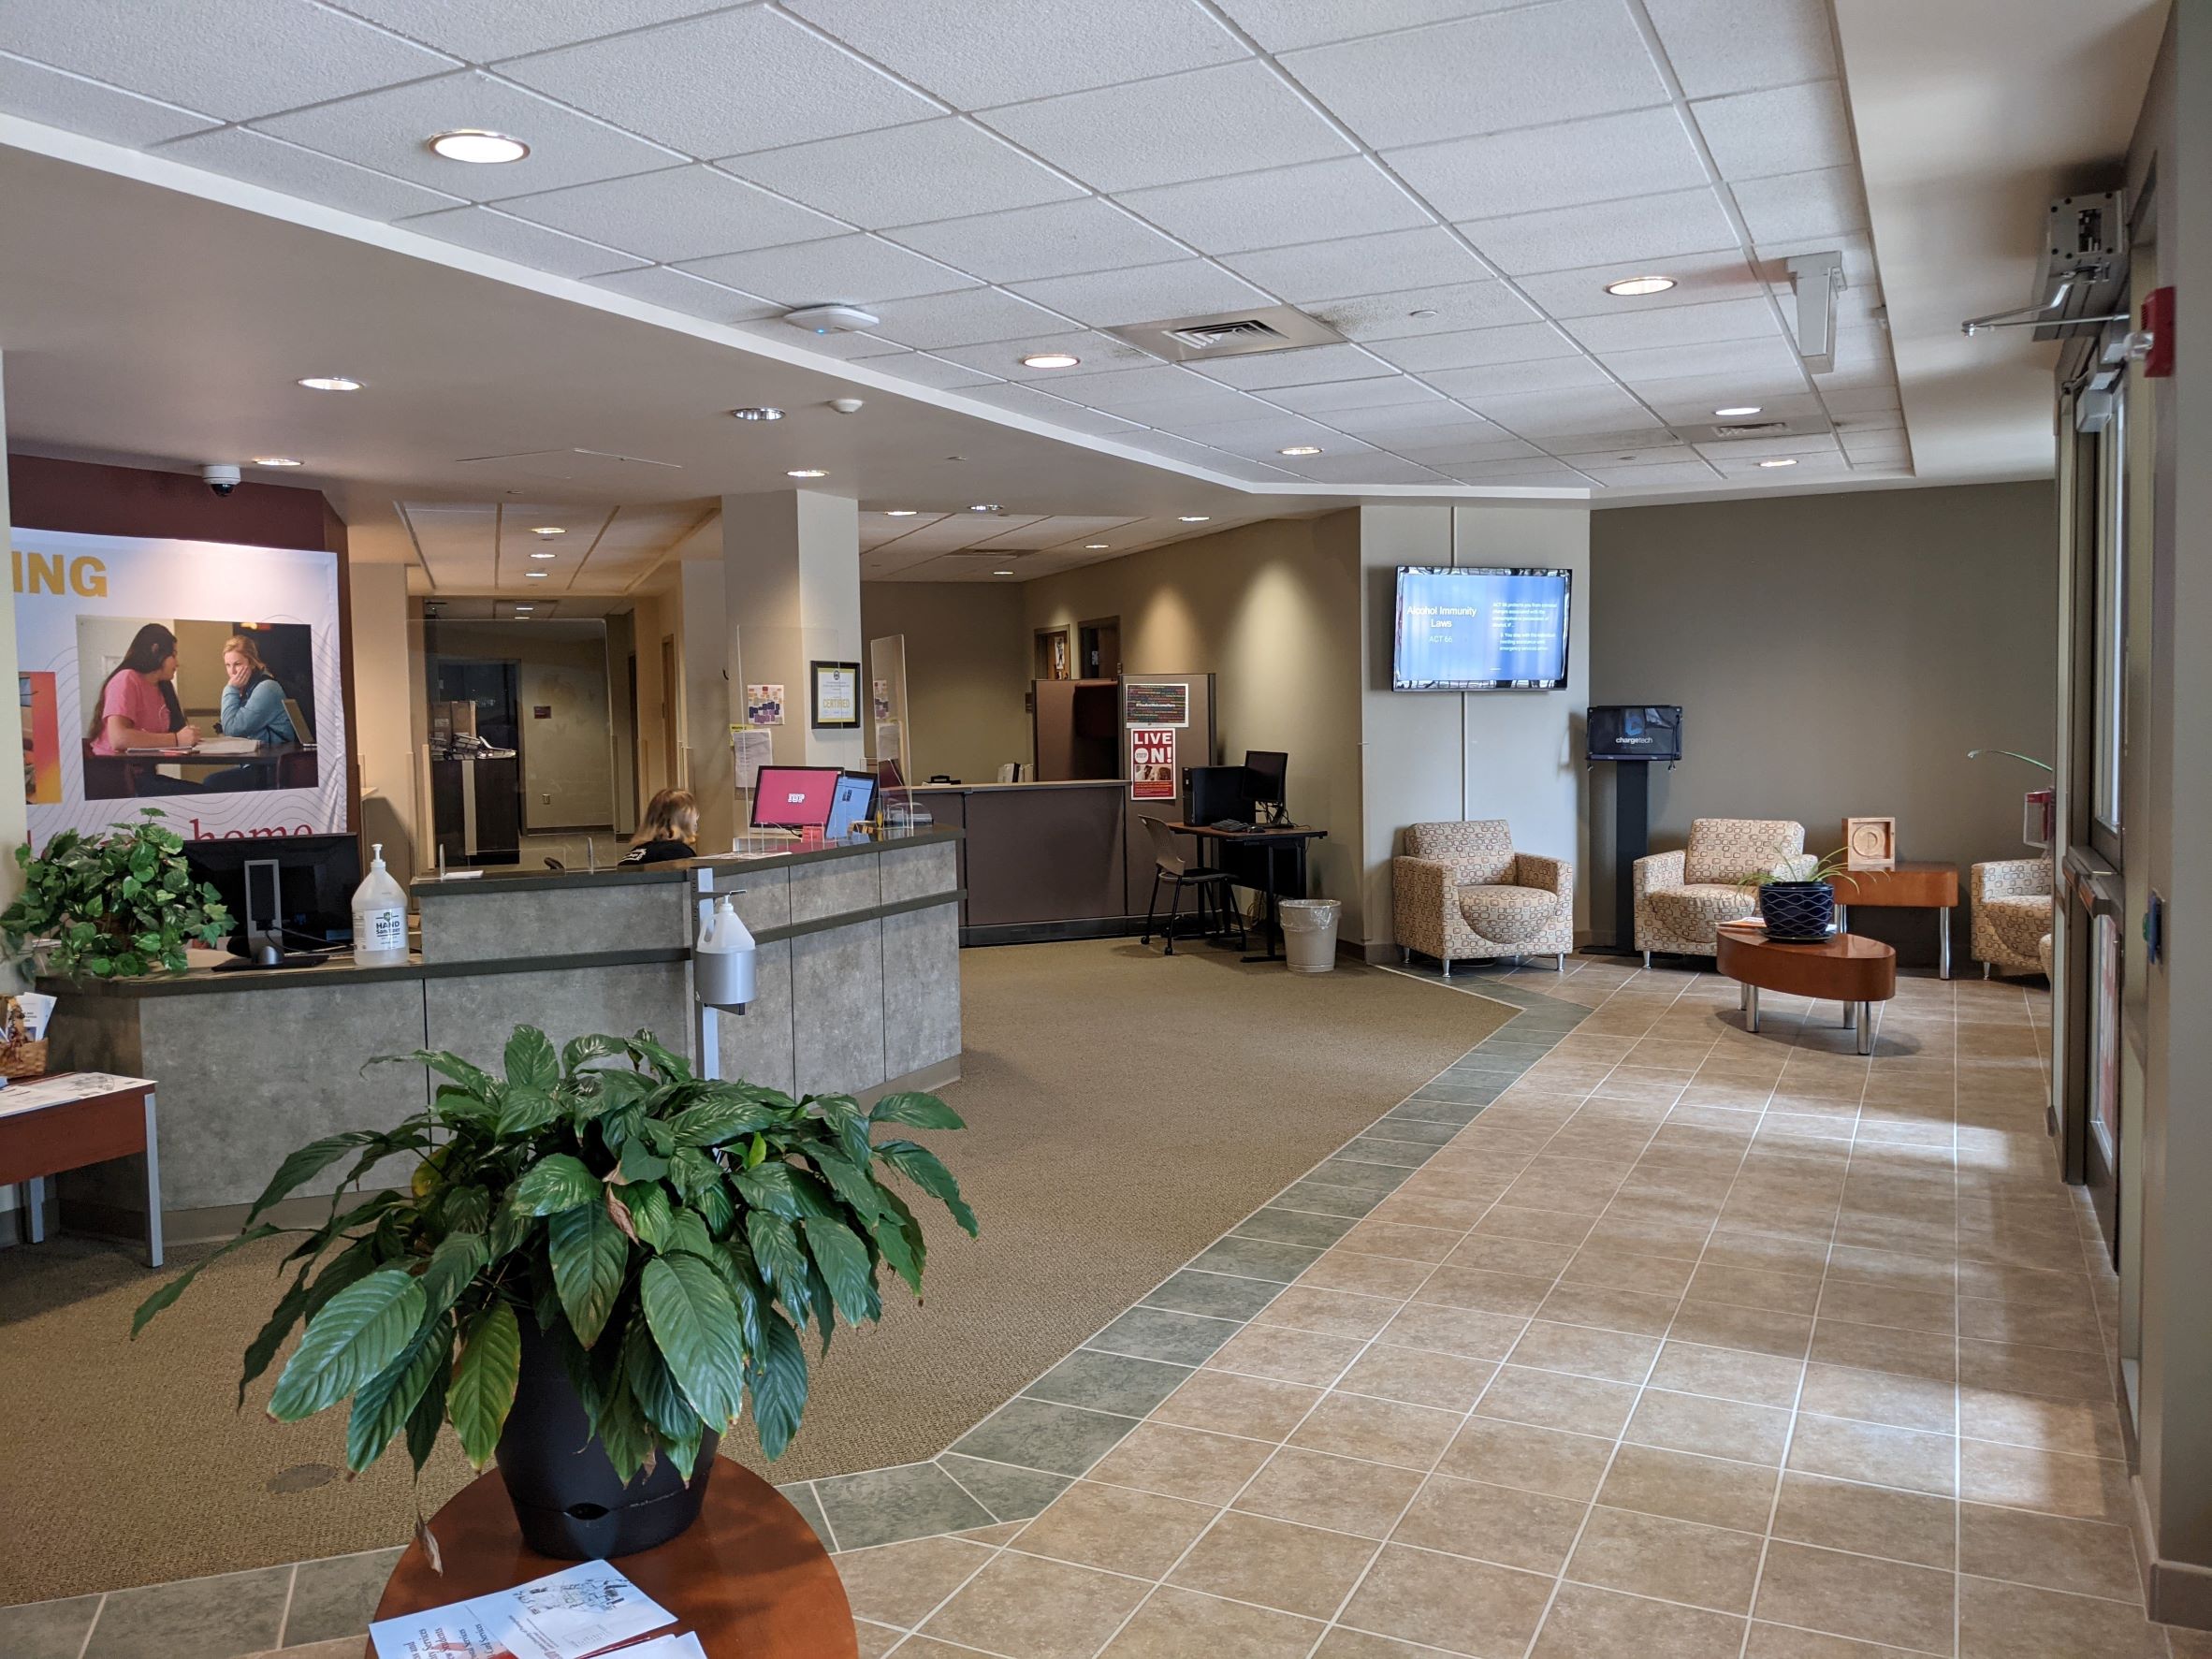 Campus Office of Residence Life offices with contemporary gray reception desk, white ceiling tile, carpet and ceramic tile lobby, olive green walls, furniture and plants